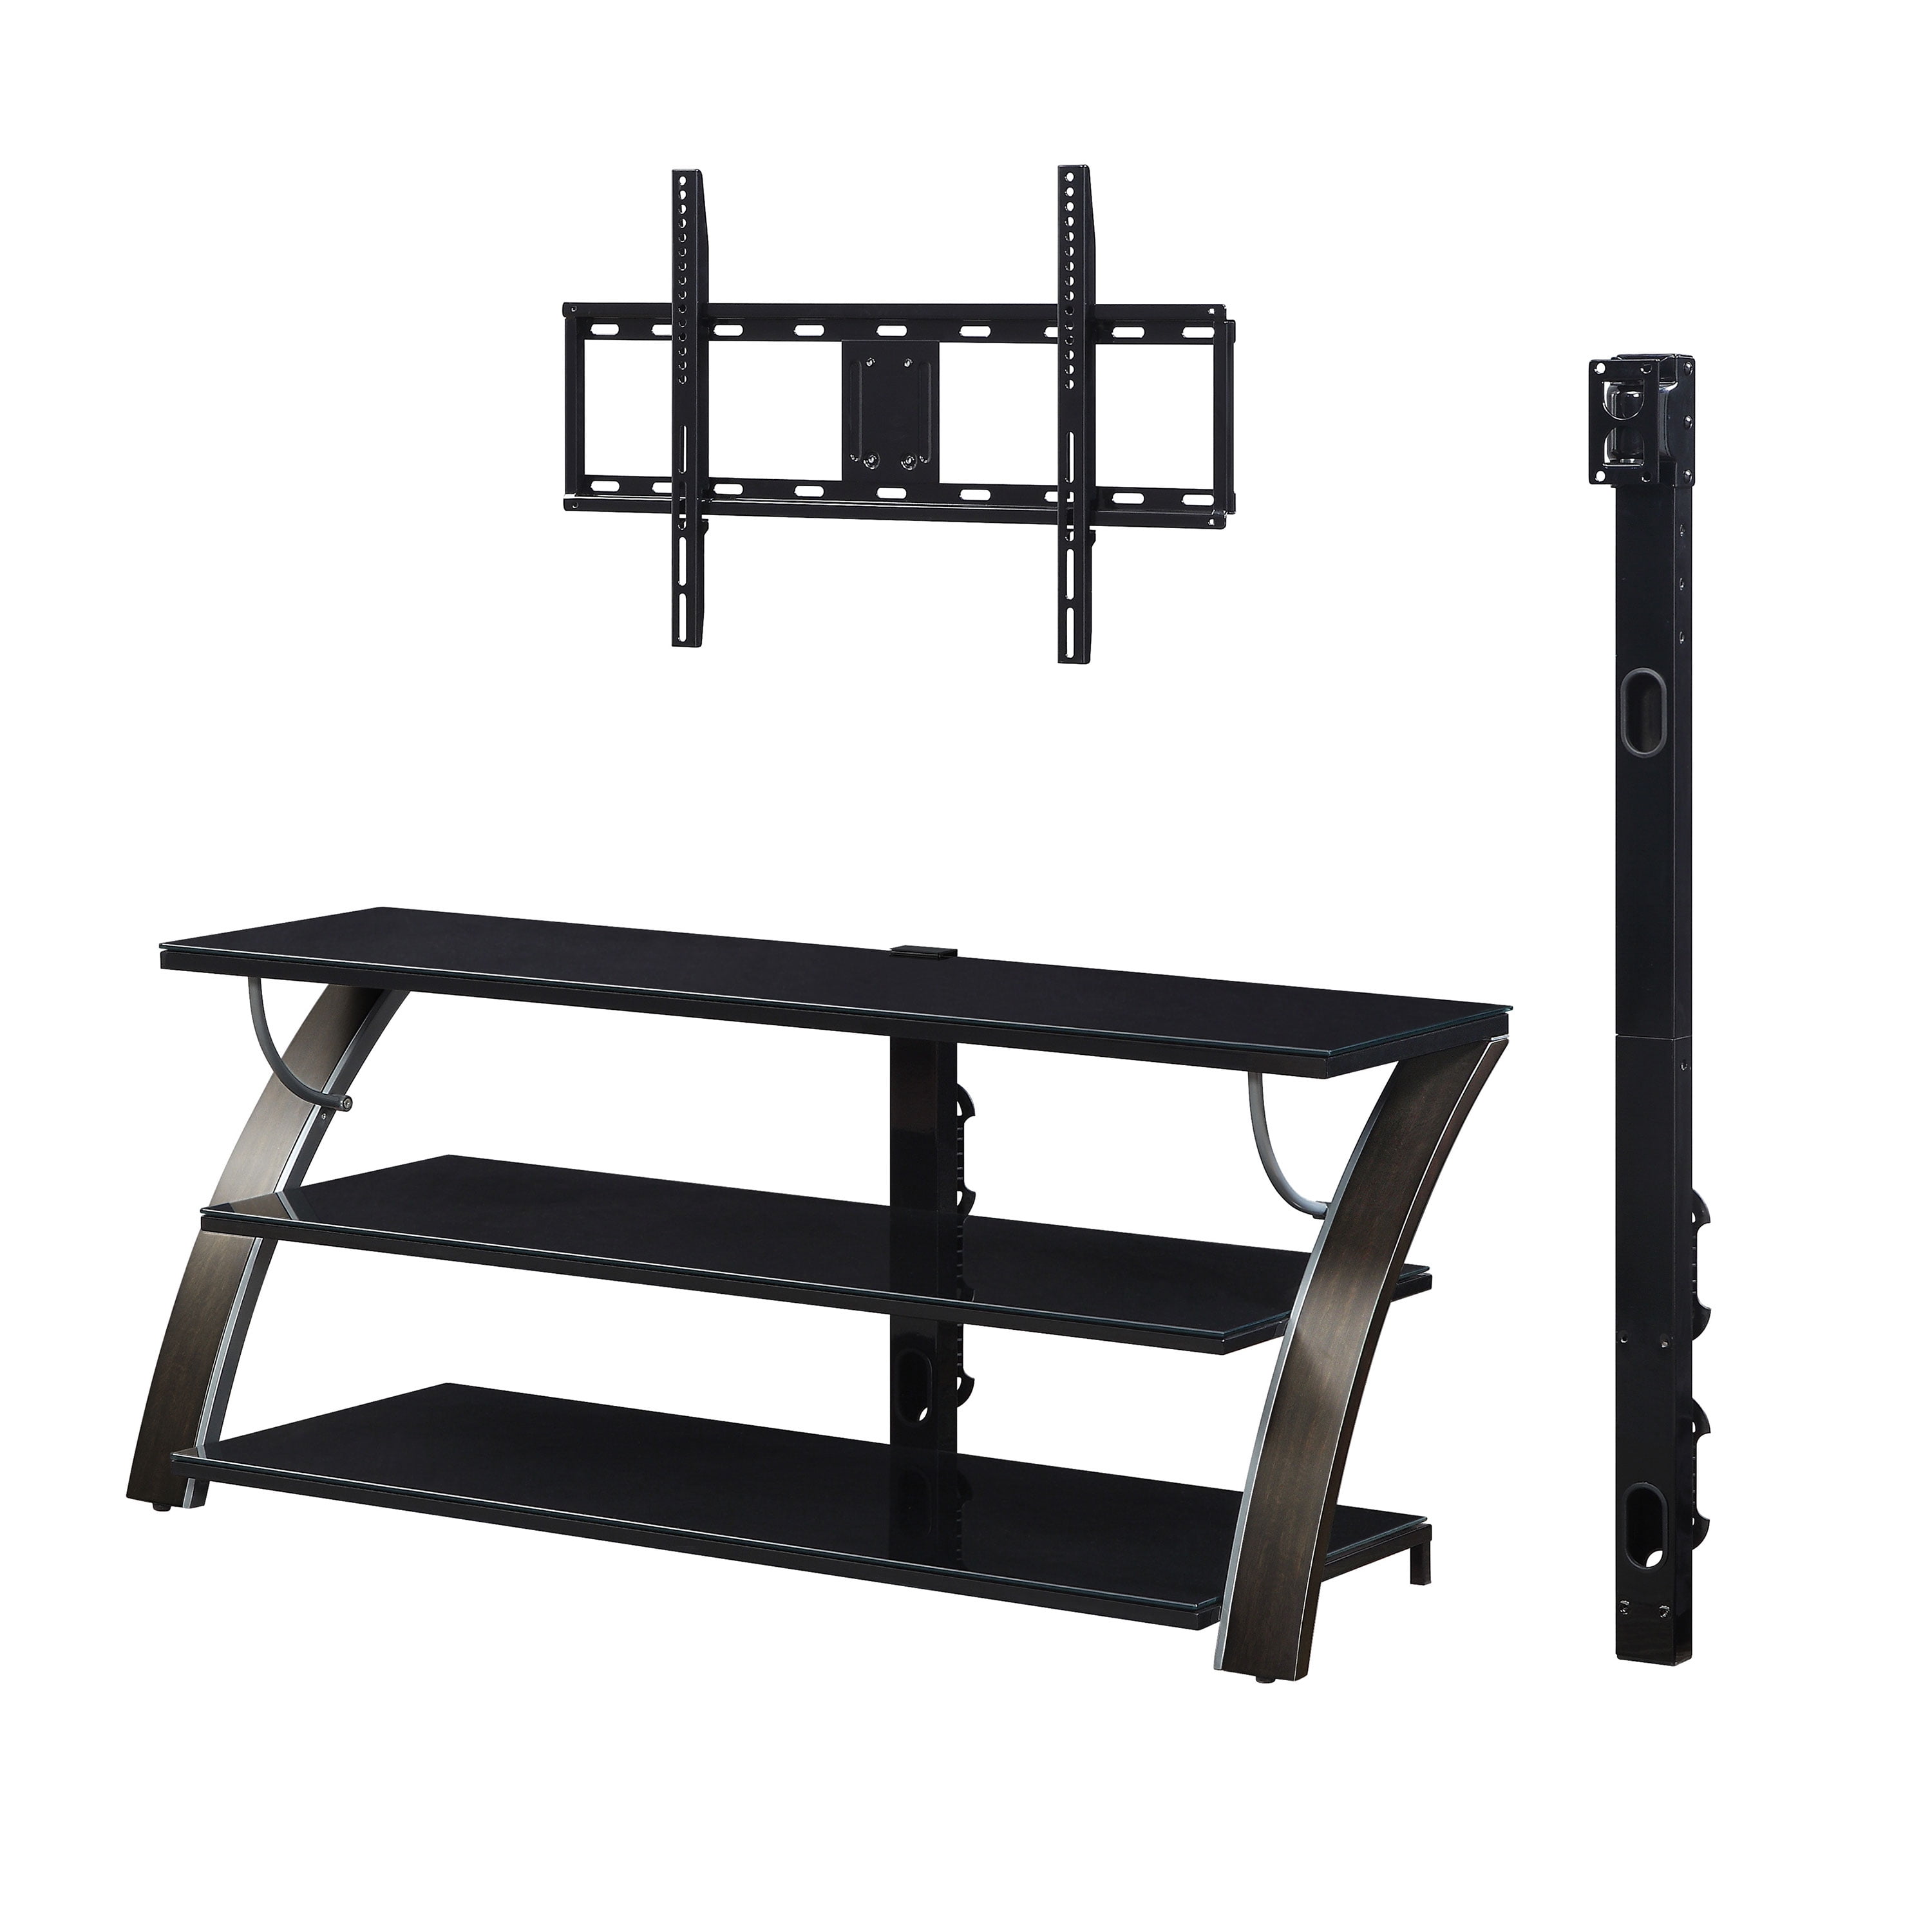 2 color Whalen Payton 3-in-1 Flat Panel TV Stand for TVs up to 65" 